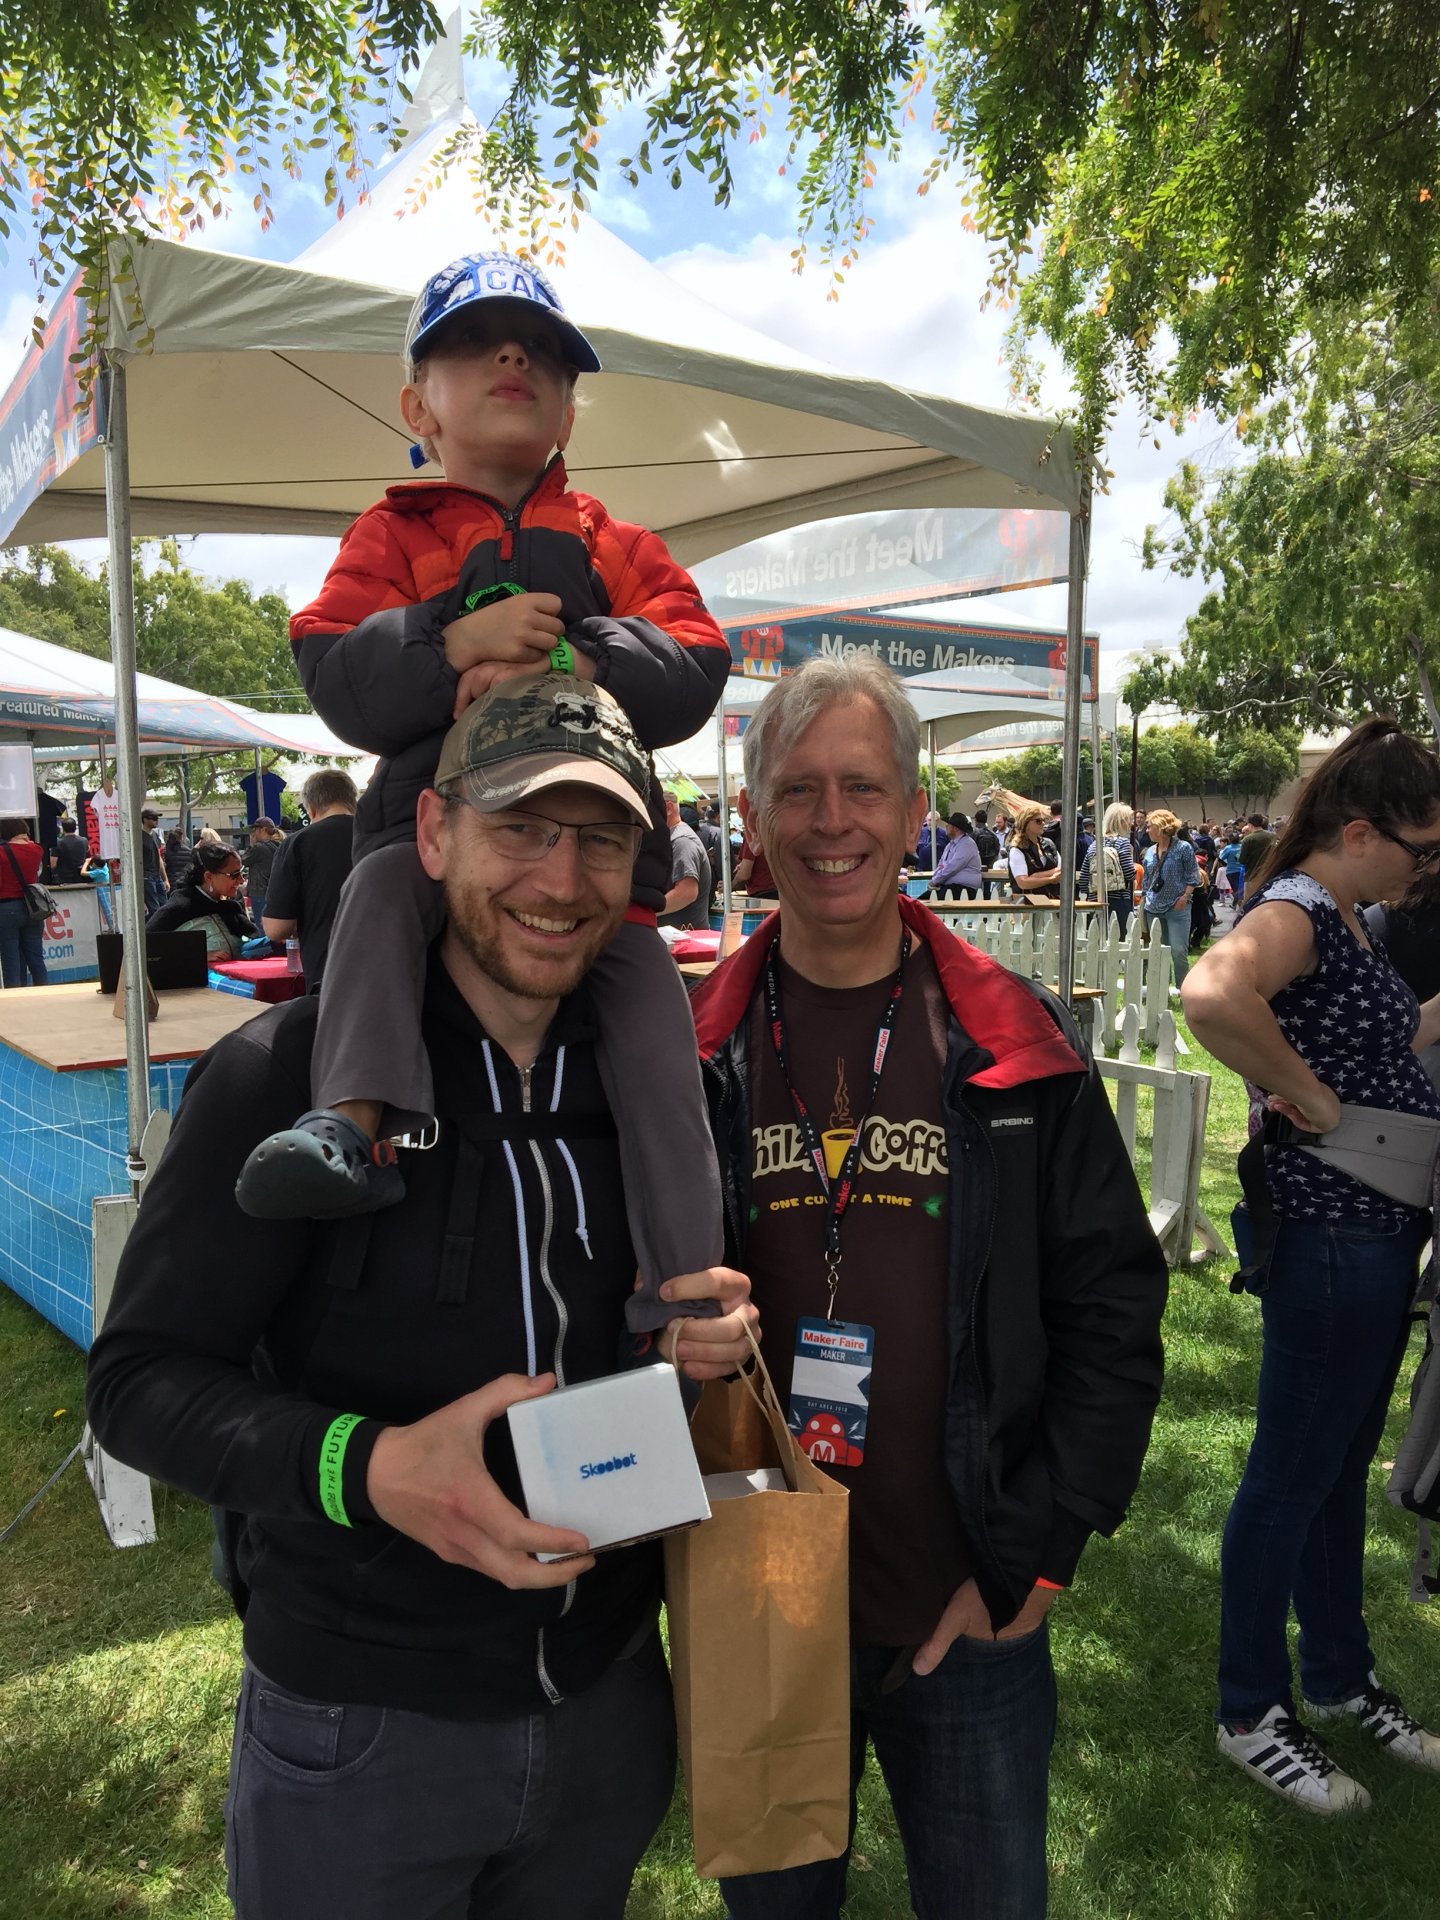 First Skoobot customer at San Mateo Maker Faire - my booth is behind